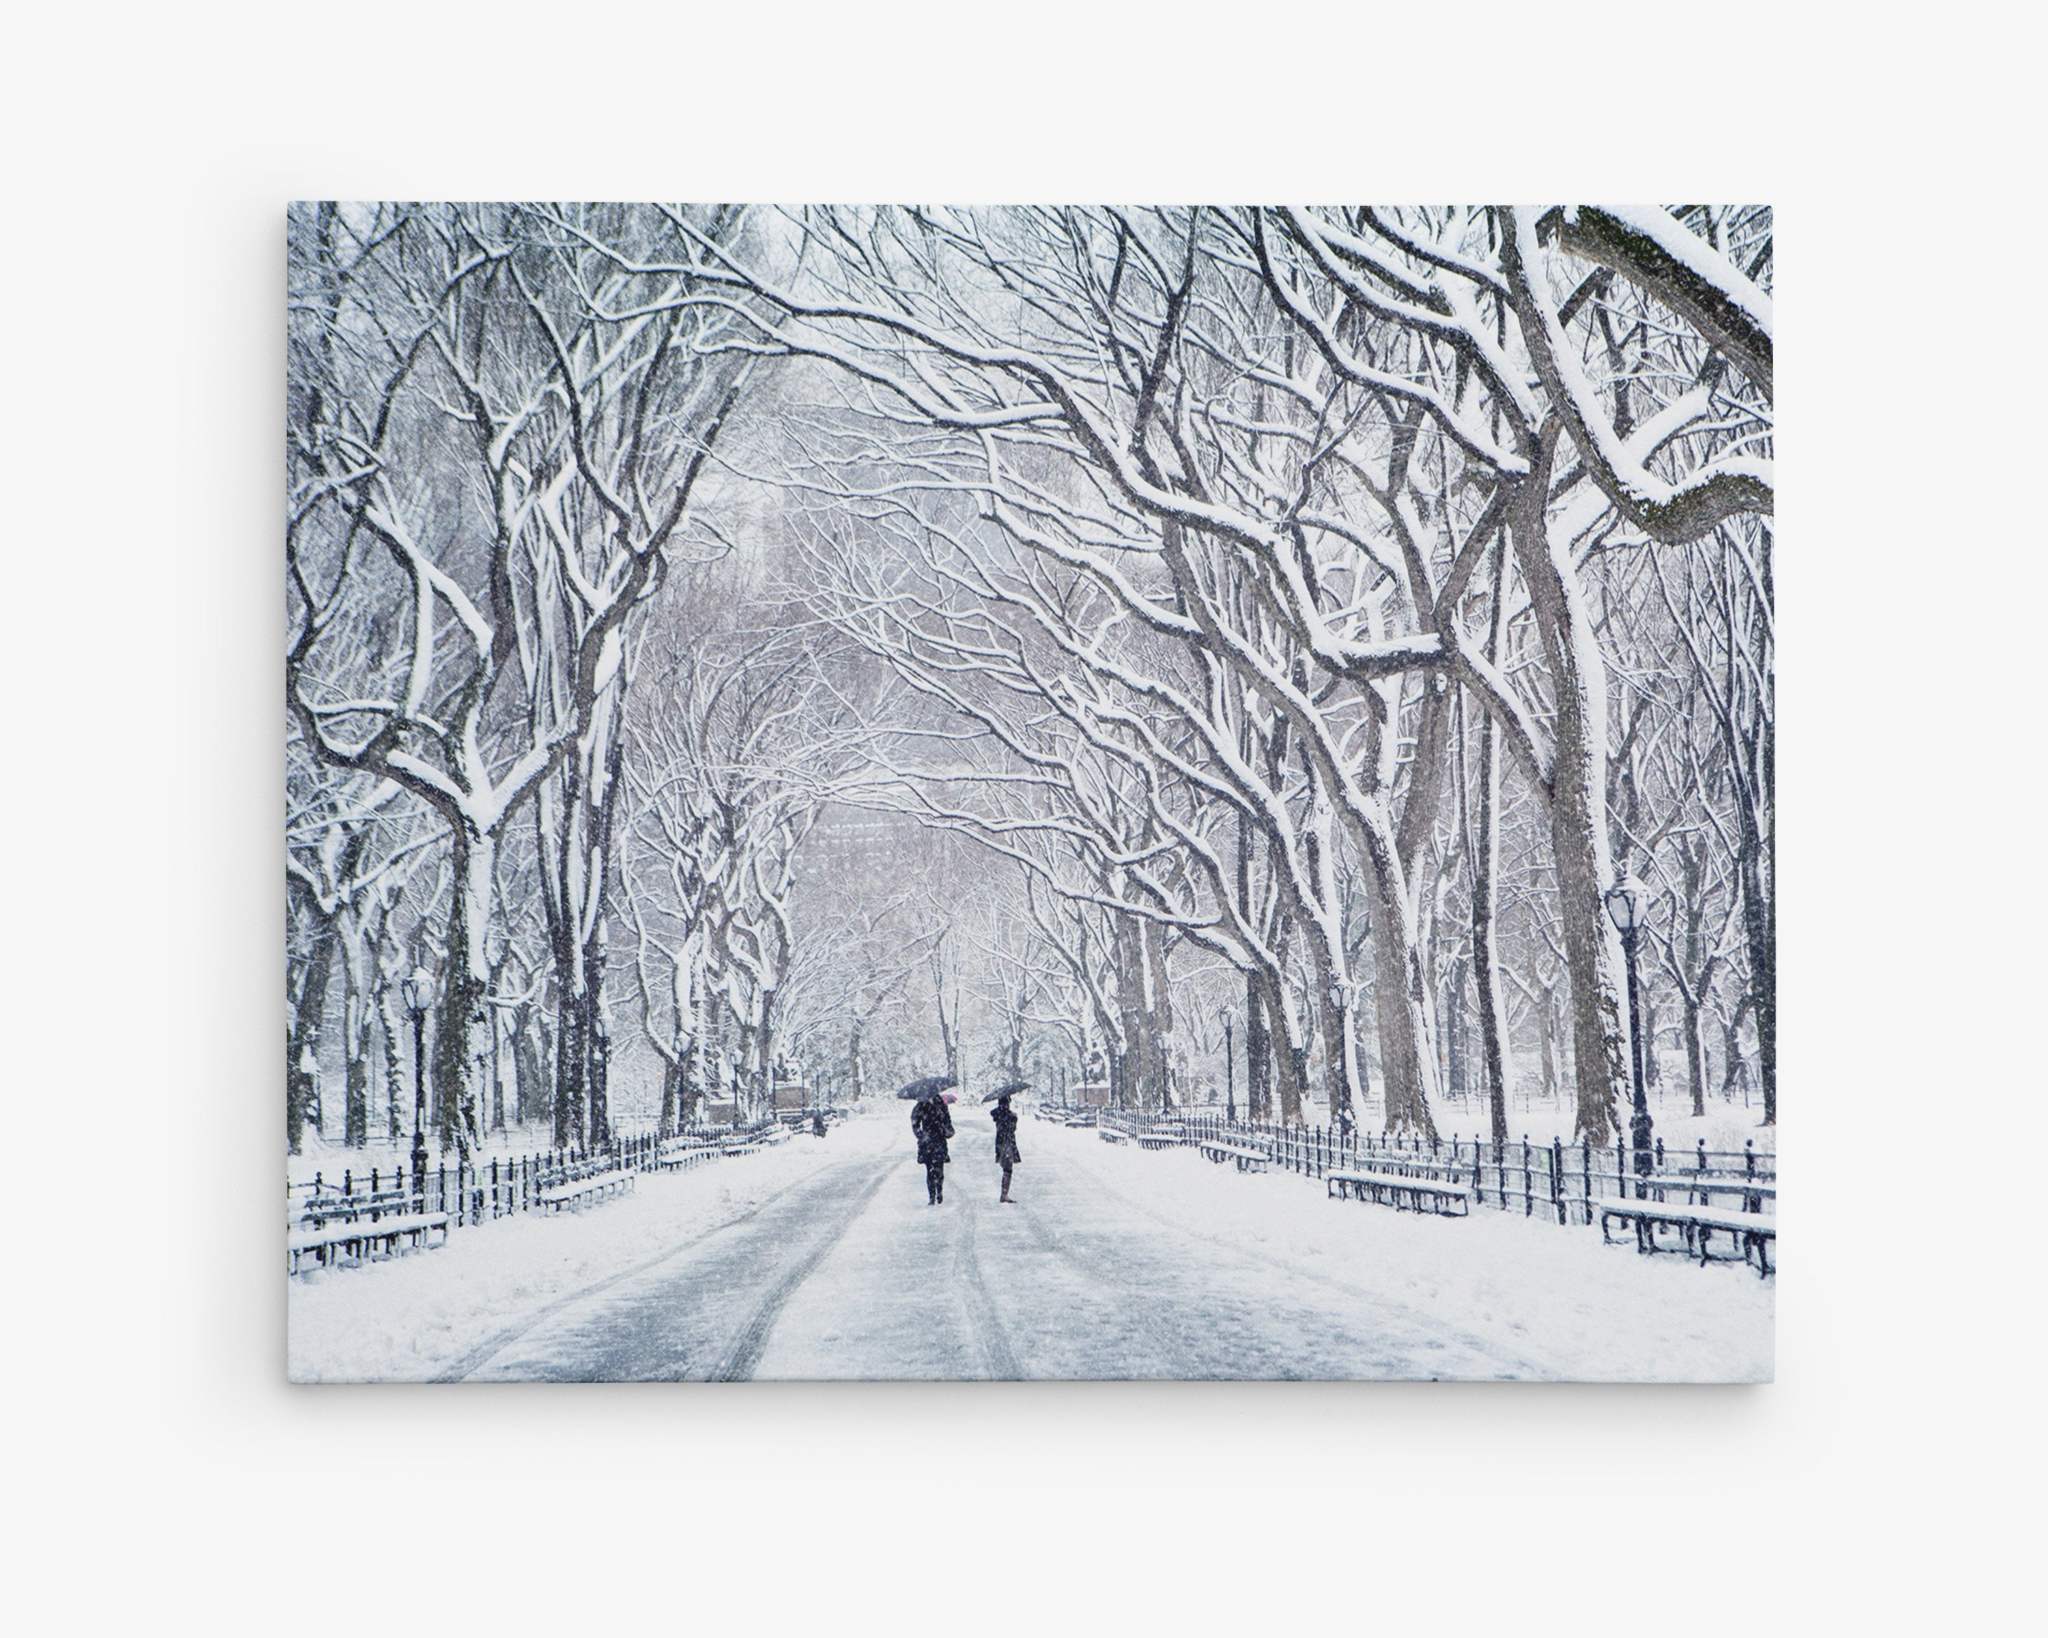 A snowy winter scene in a park with bare trees lining both sides of a wide path. Two people, dressed in winter clothing, walk down the path, creating footprints in the snow. The sky is overcast, and the entire landscape is covered in a thick layer of snow on Offley Green's New York Central Park Wall Art, 'The Mall In Winter'.